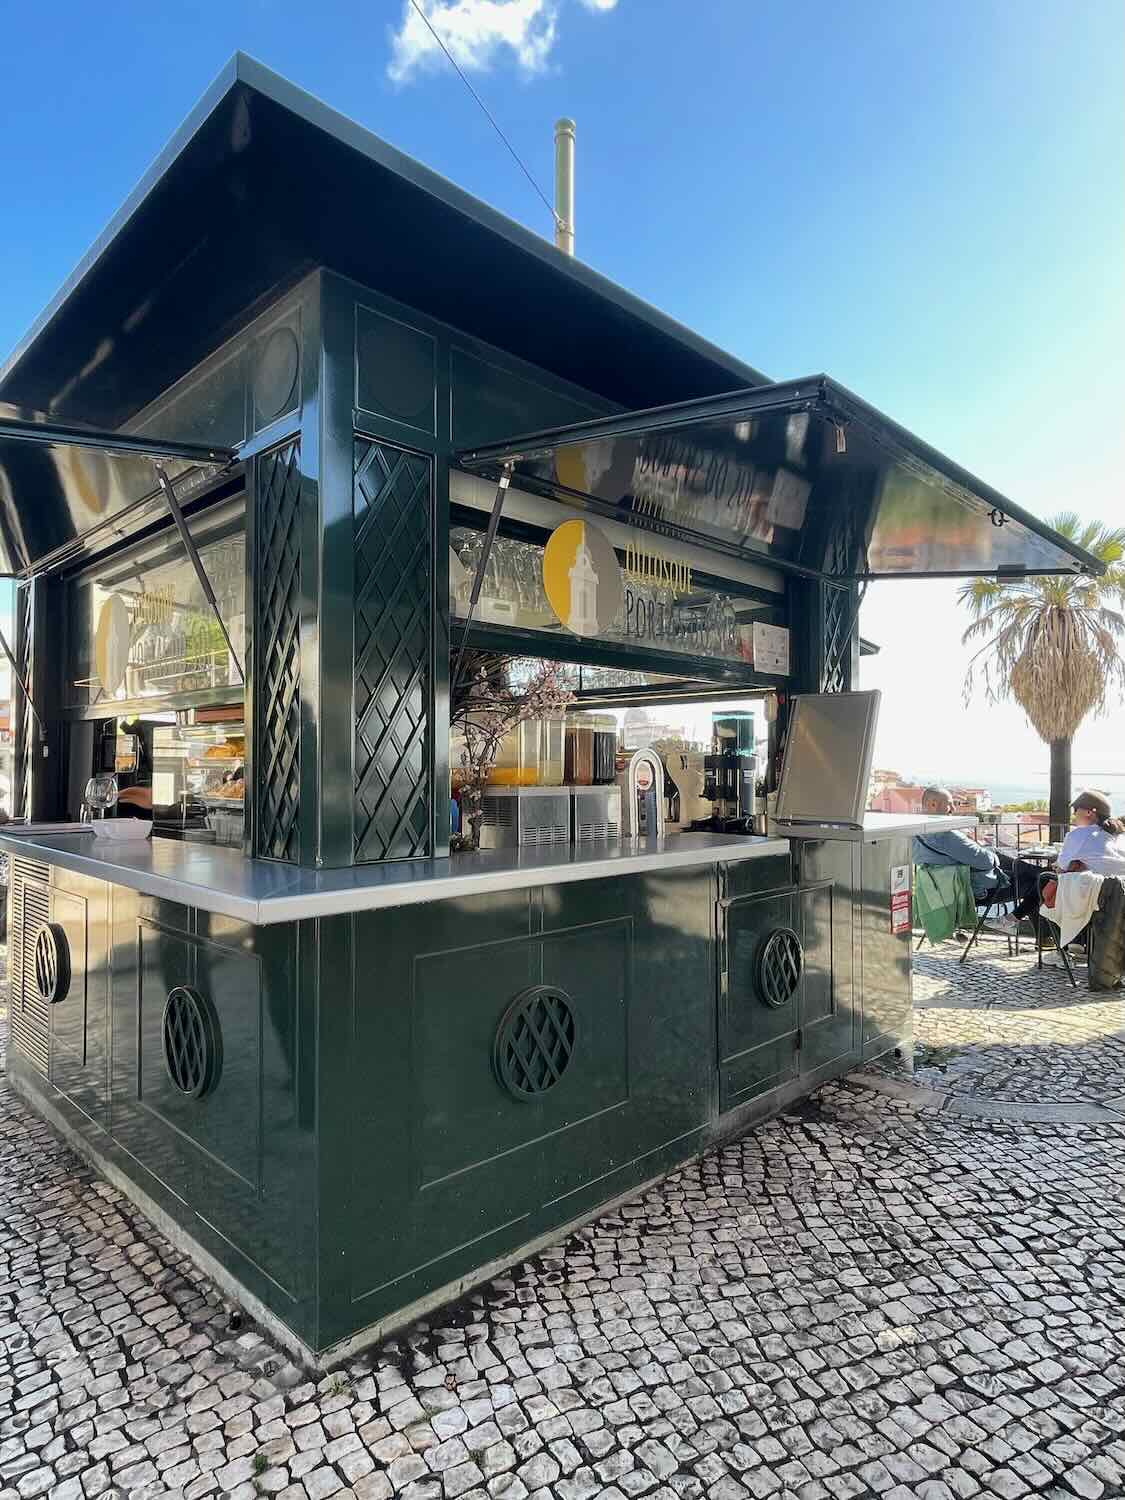 A quaint, green-painted kiosk cafe in Lisbon under a clear sky, offering a spot for refreshing drinks and a casual outdoor seating area